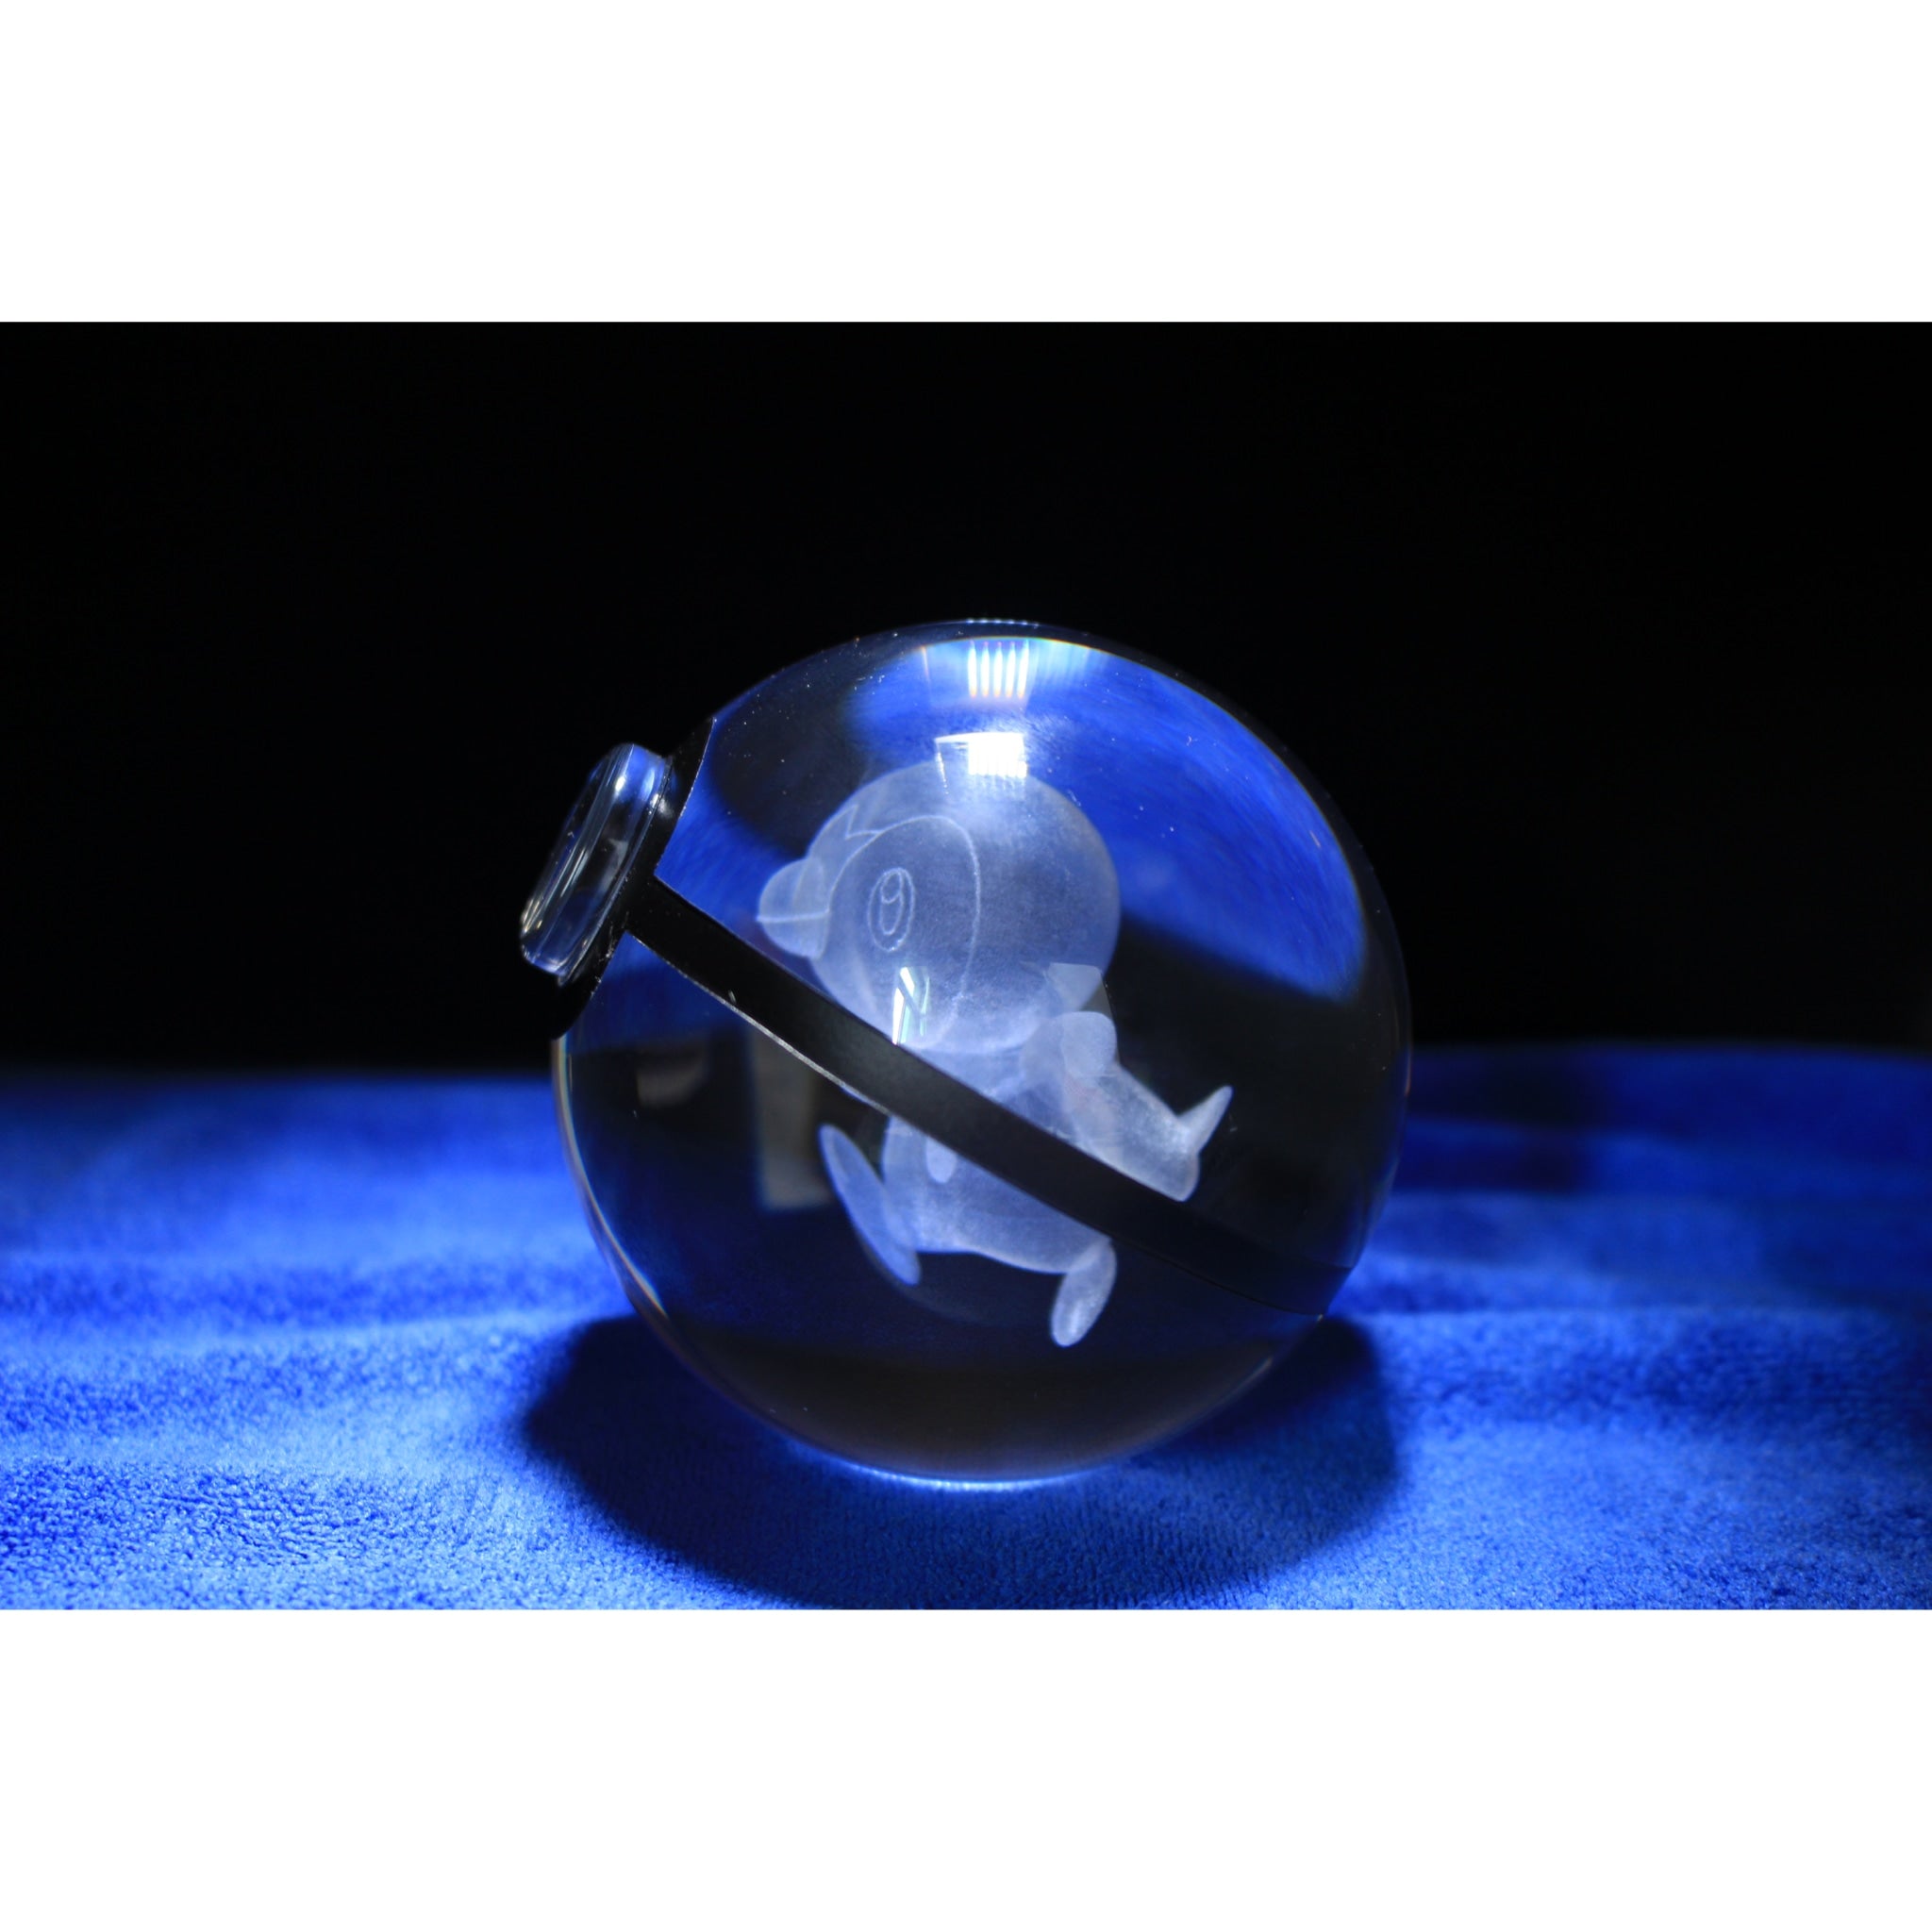 Piplup Pokemon Glass Crystal Pokeball 43 with Light-Up LED Base Ornament 80mm XL Size